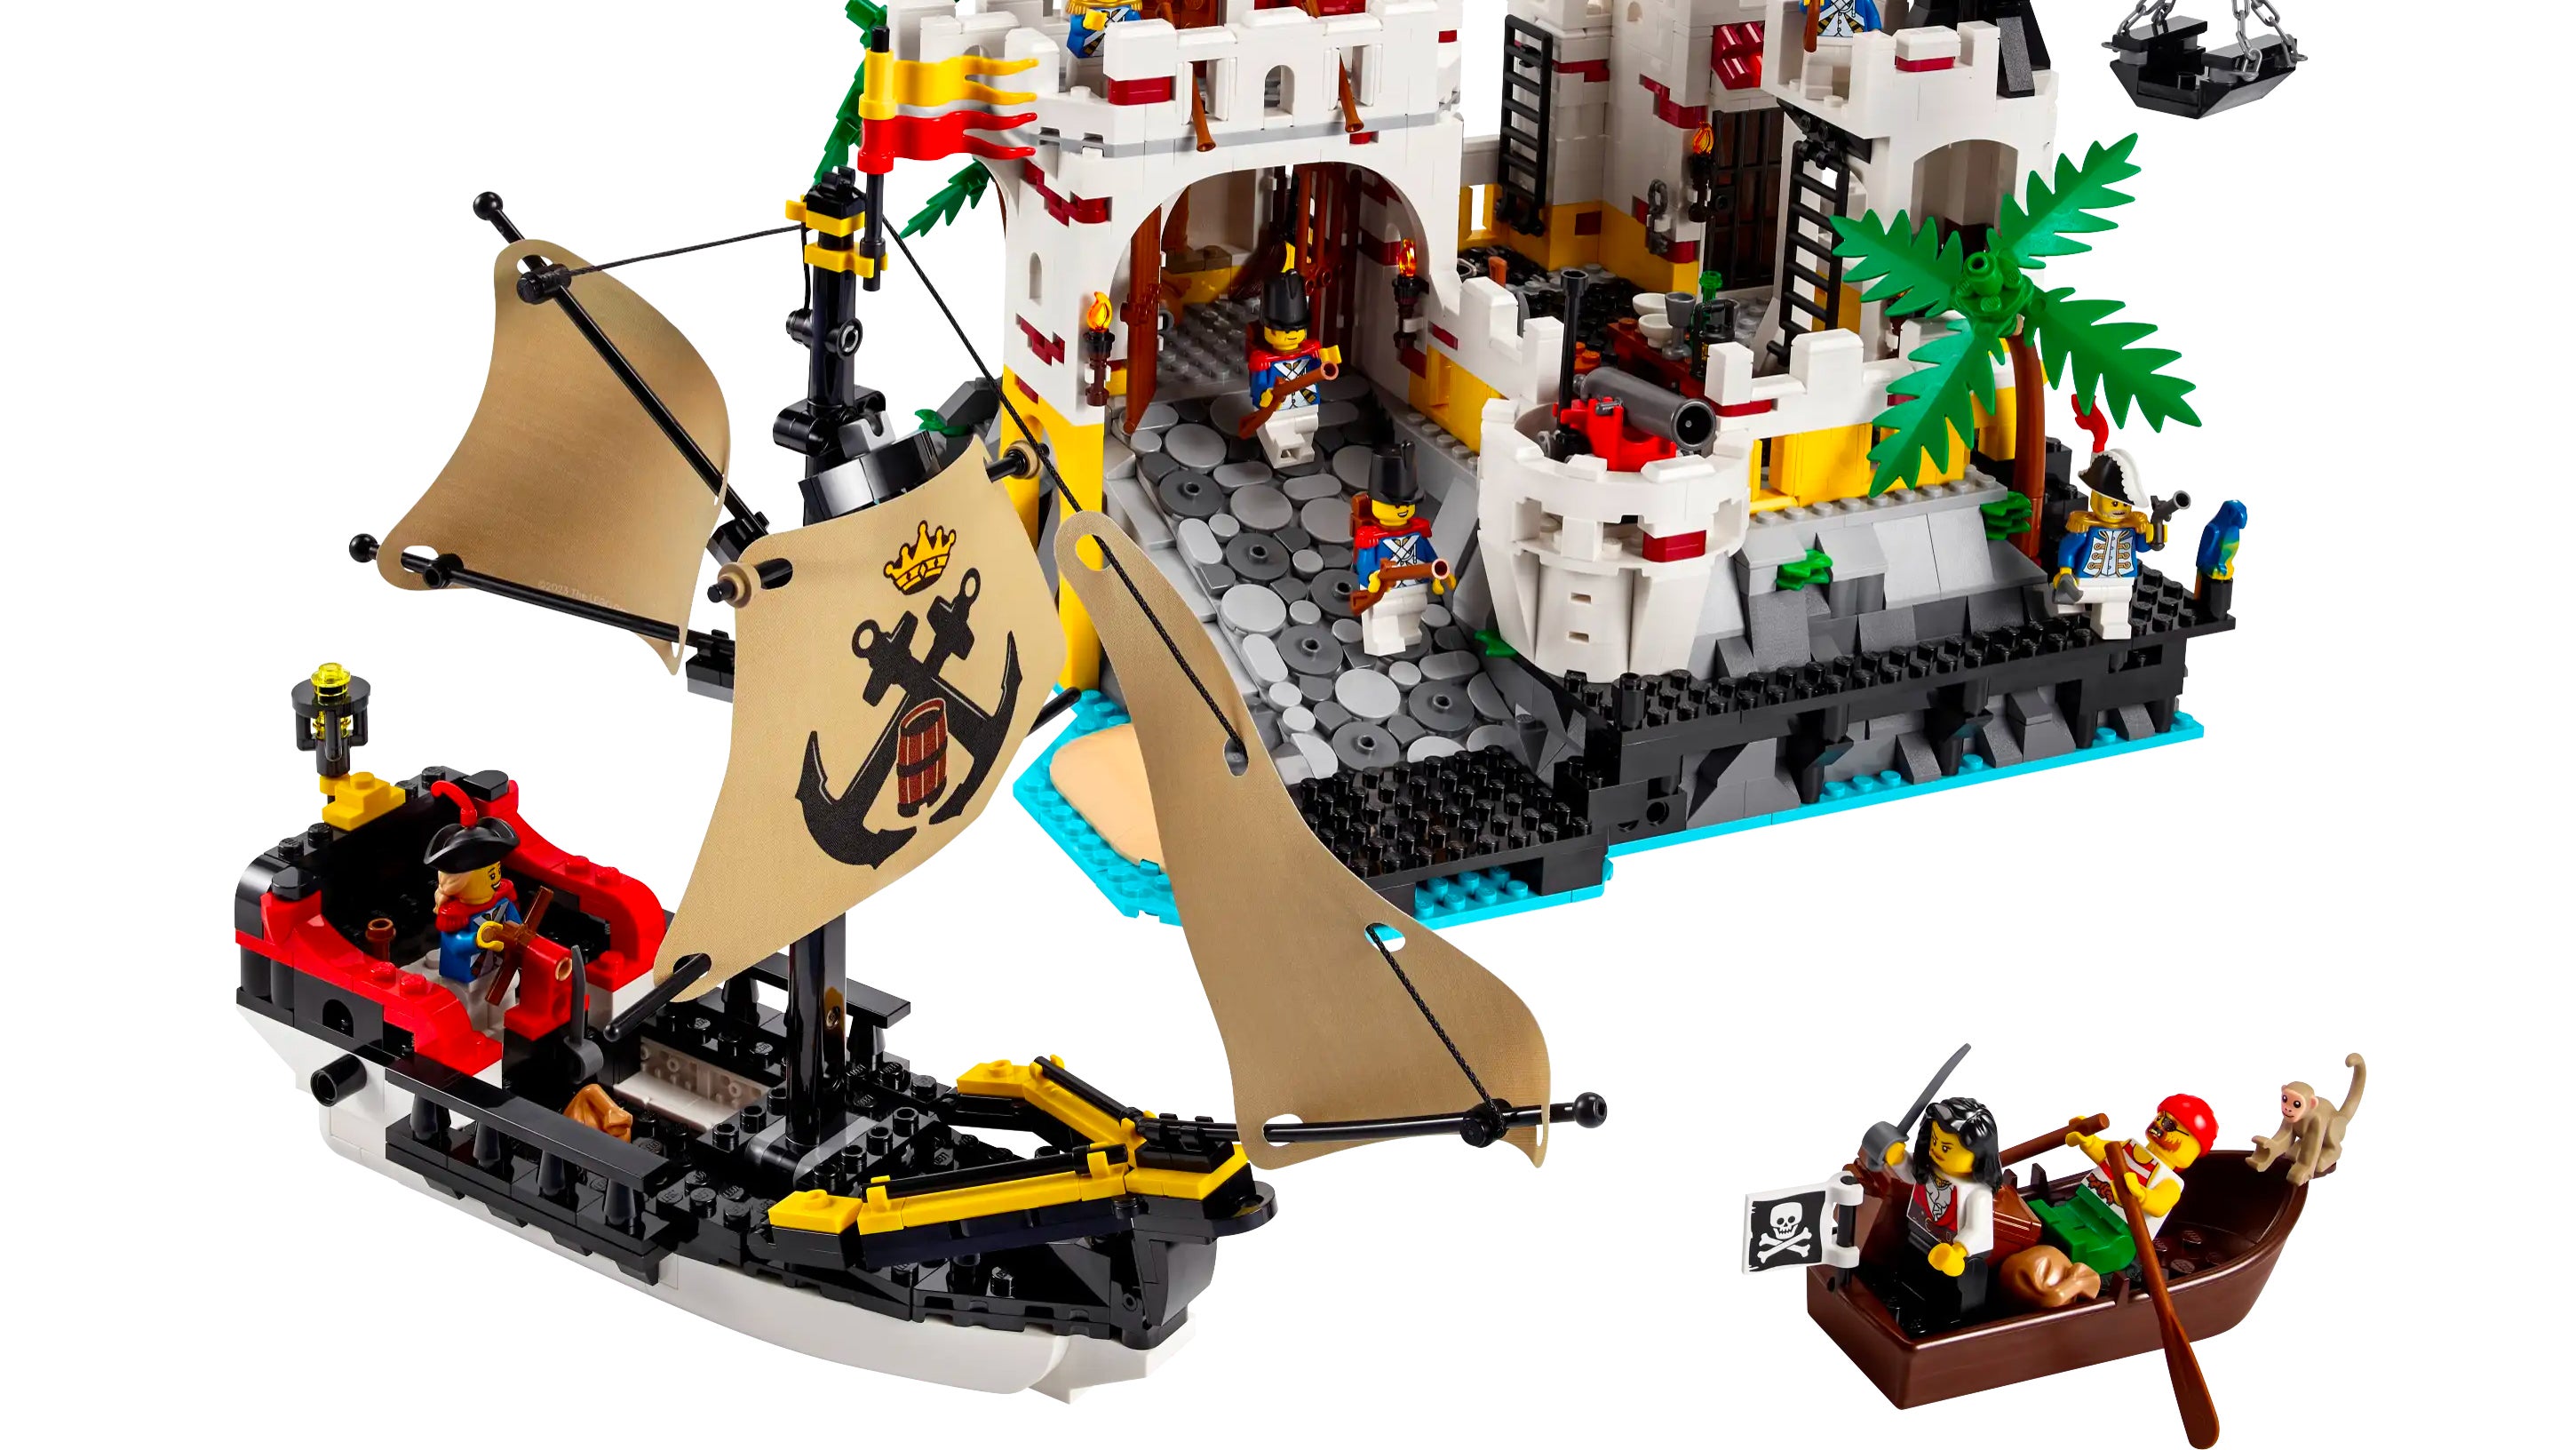 One of the Best Lego Sets Is Back With the Redesigned 2,509-Piece Eldorado Fortress